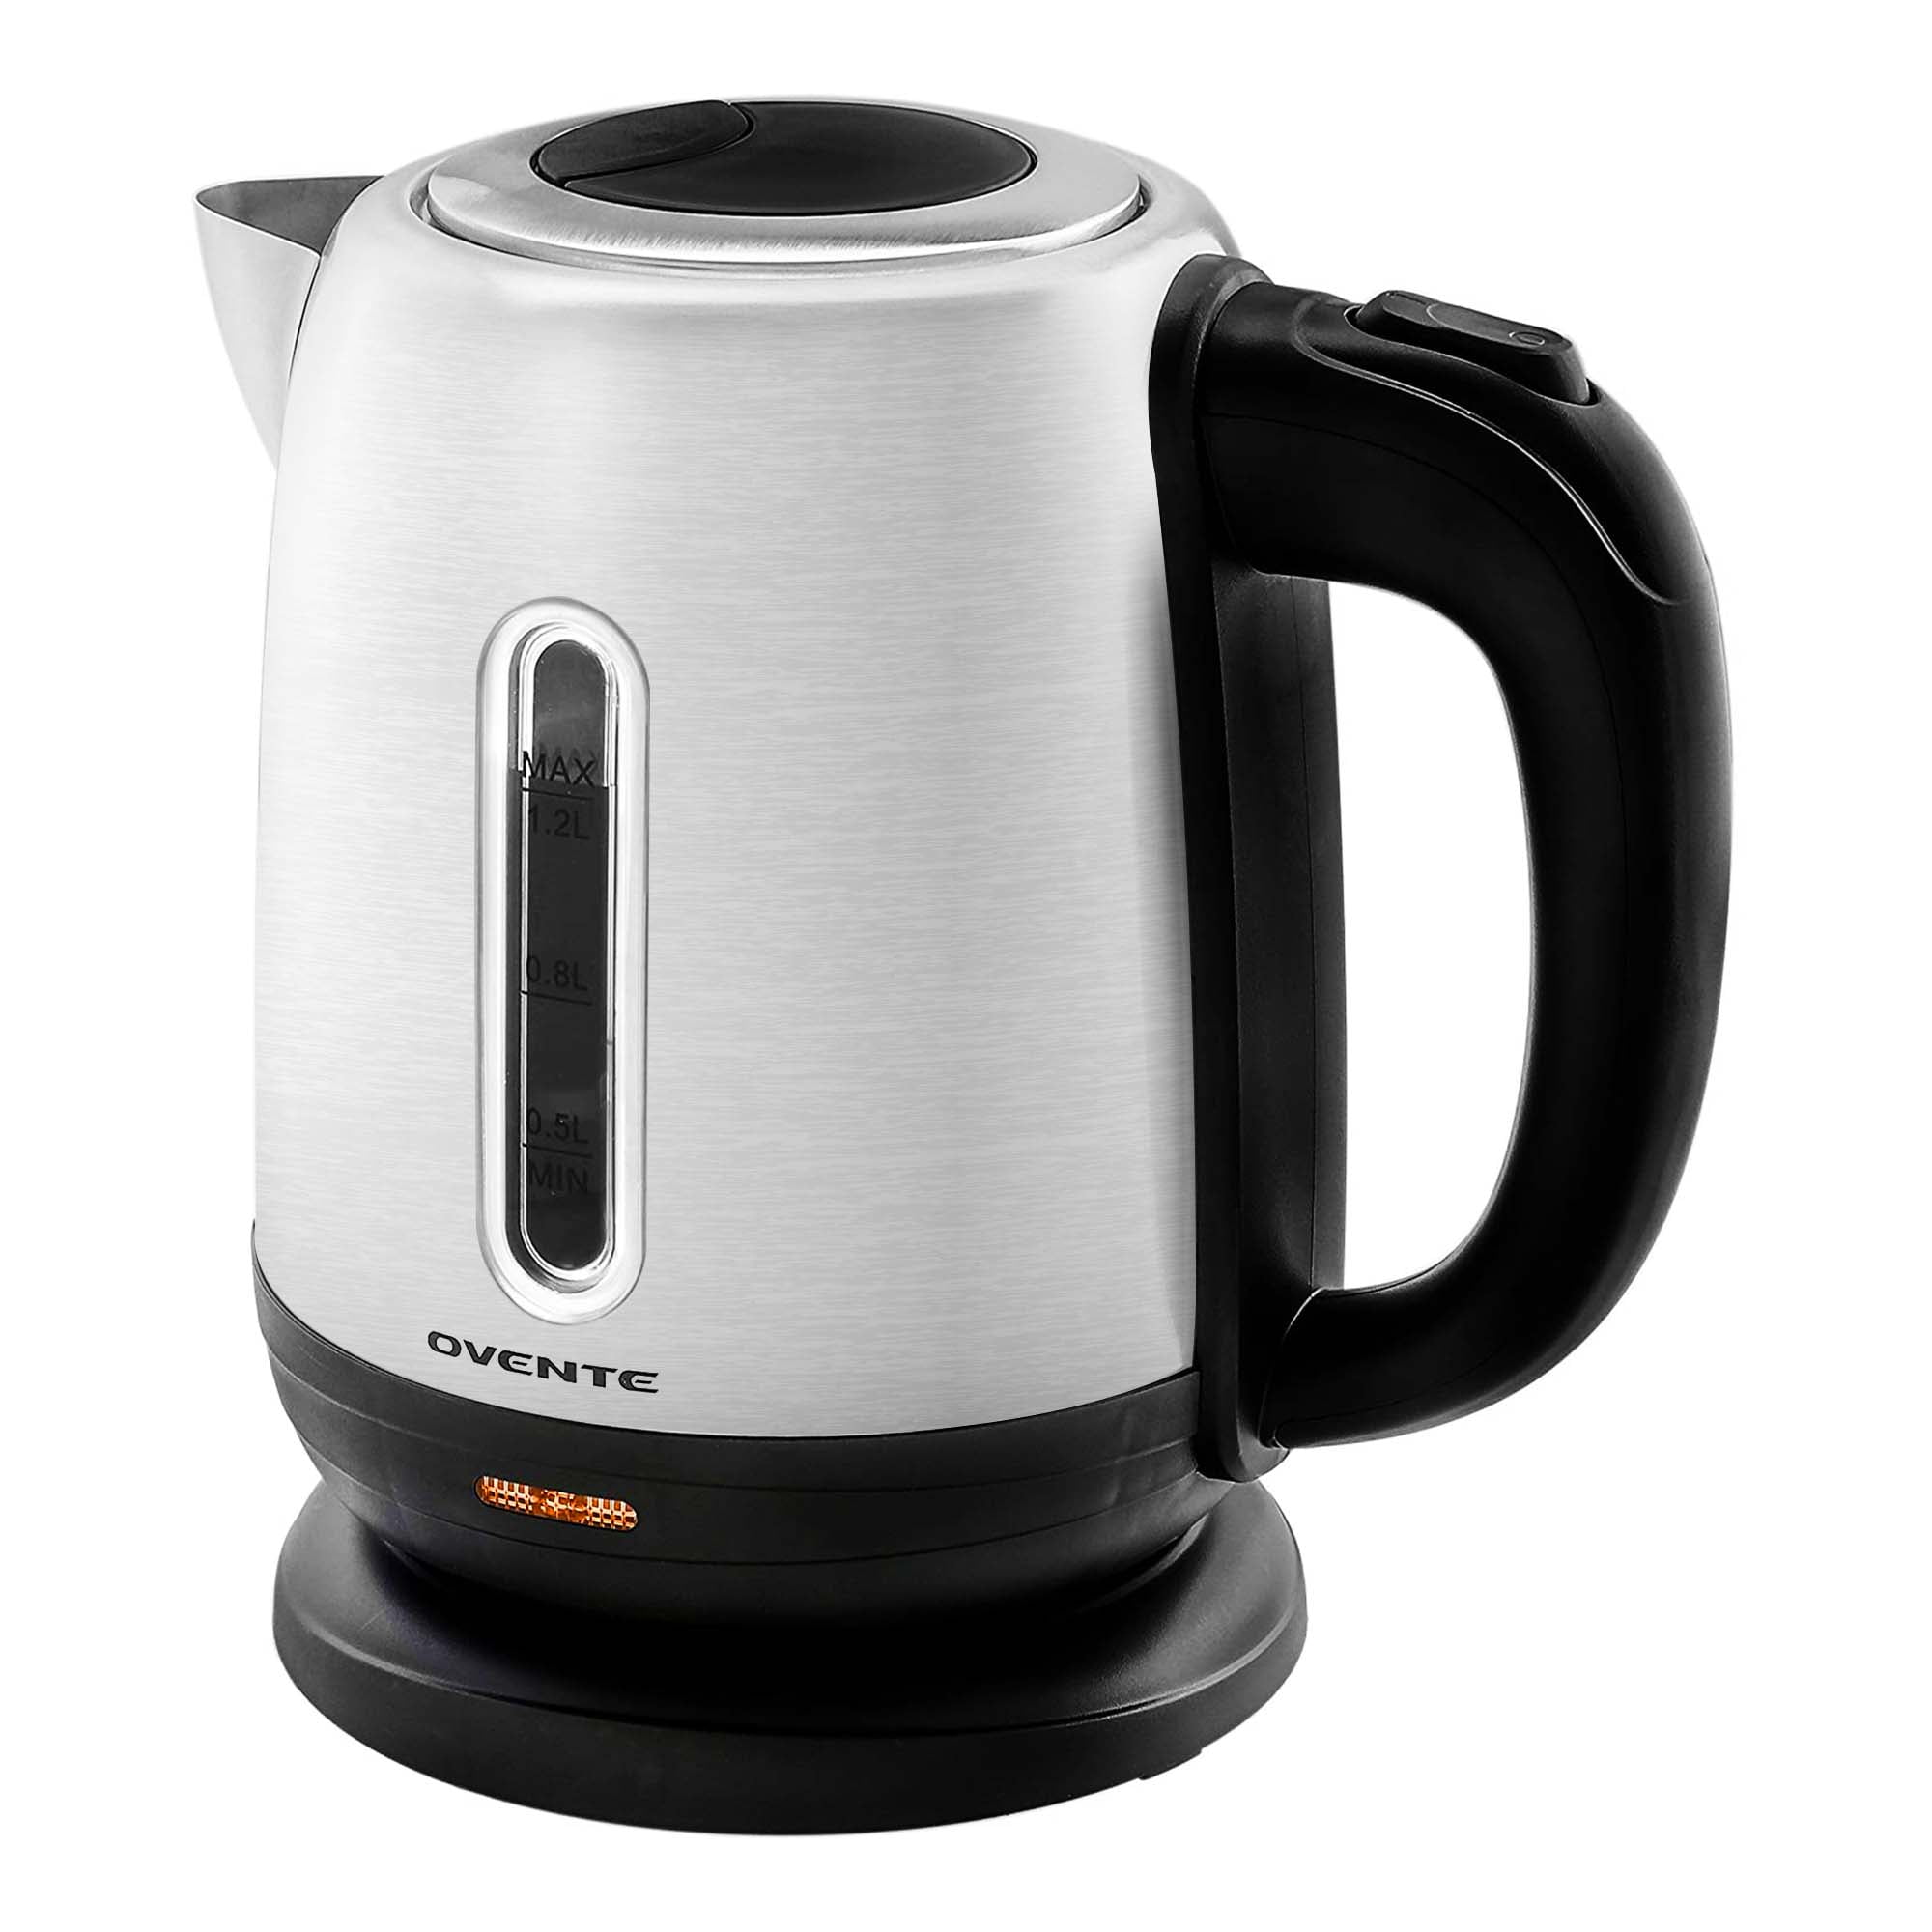 Winado 7.5-Cup Glass and Stainless Steel Electric Kettle with 7-LED Lights, Silver